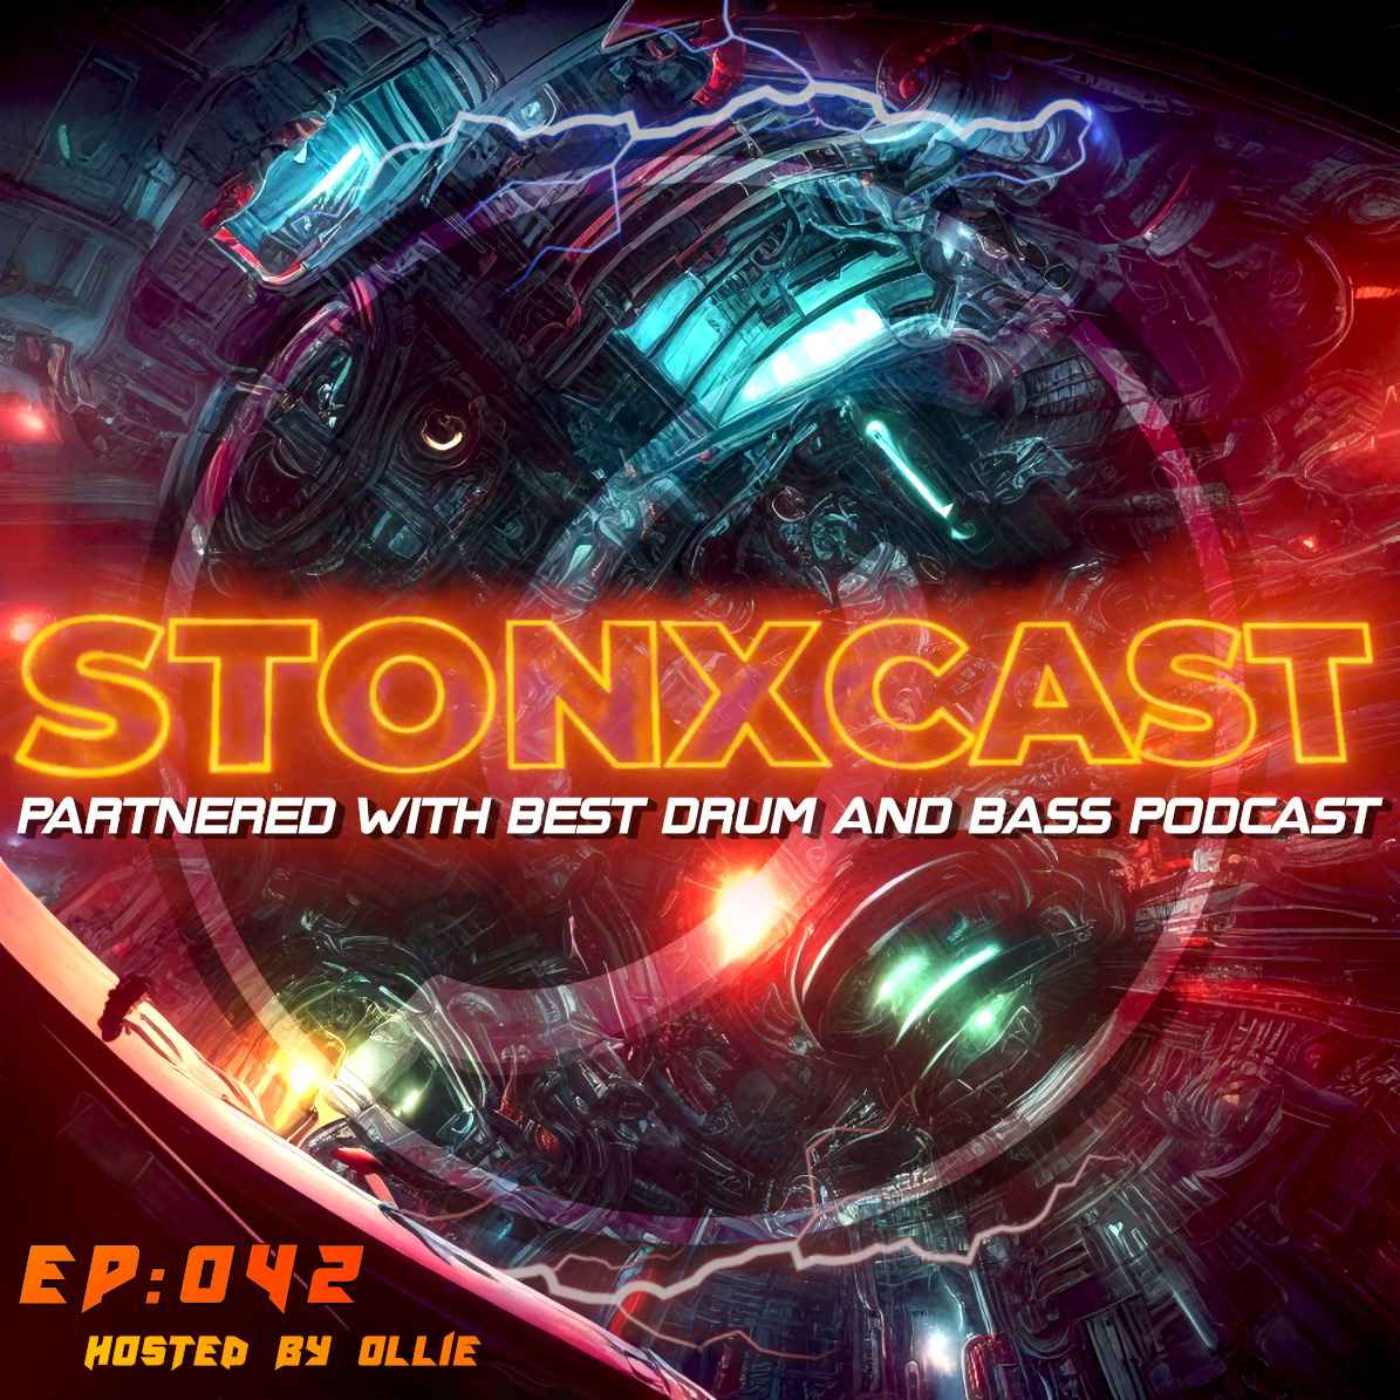 Stonxcast EP:042 - Hosted by Ollie Artwork